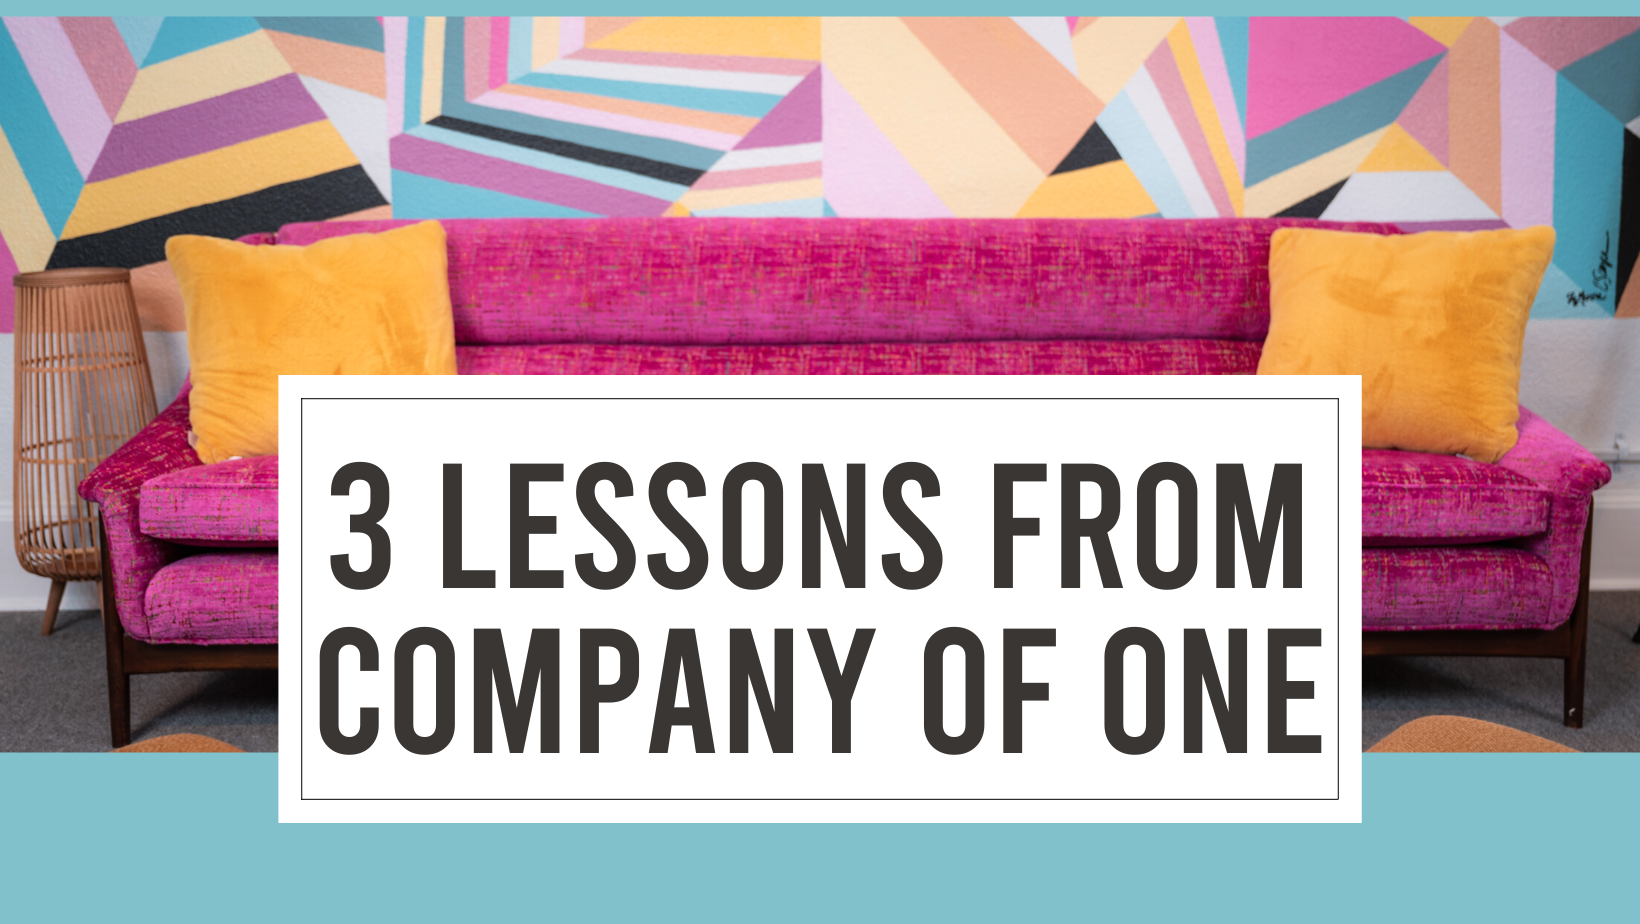 3 Lessons From Company of One